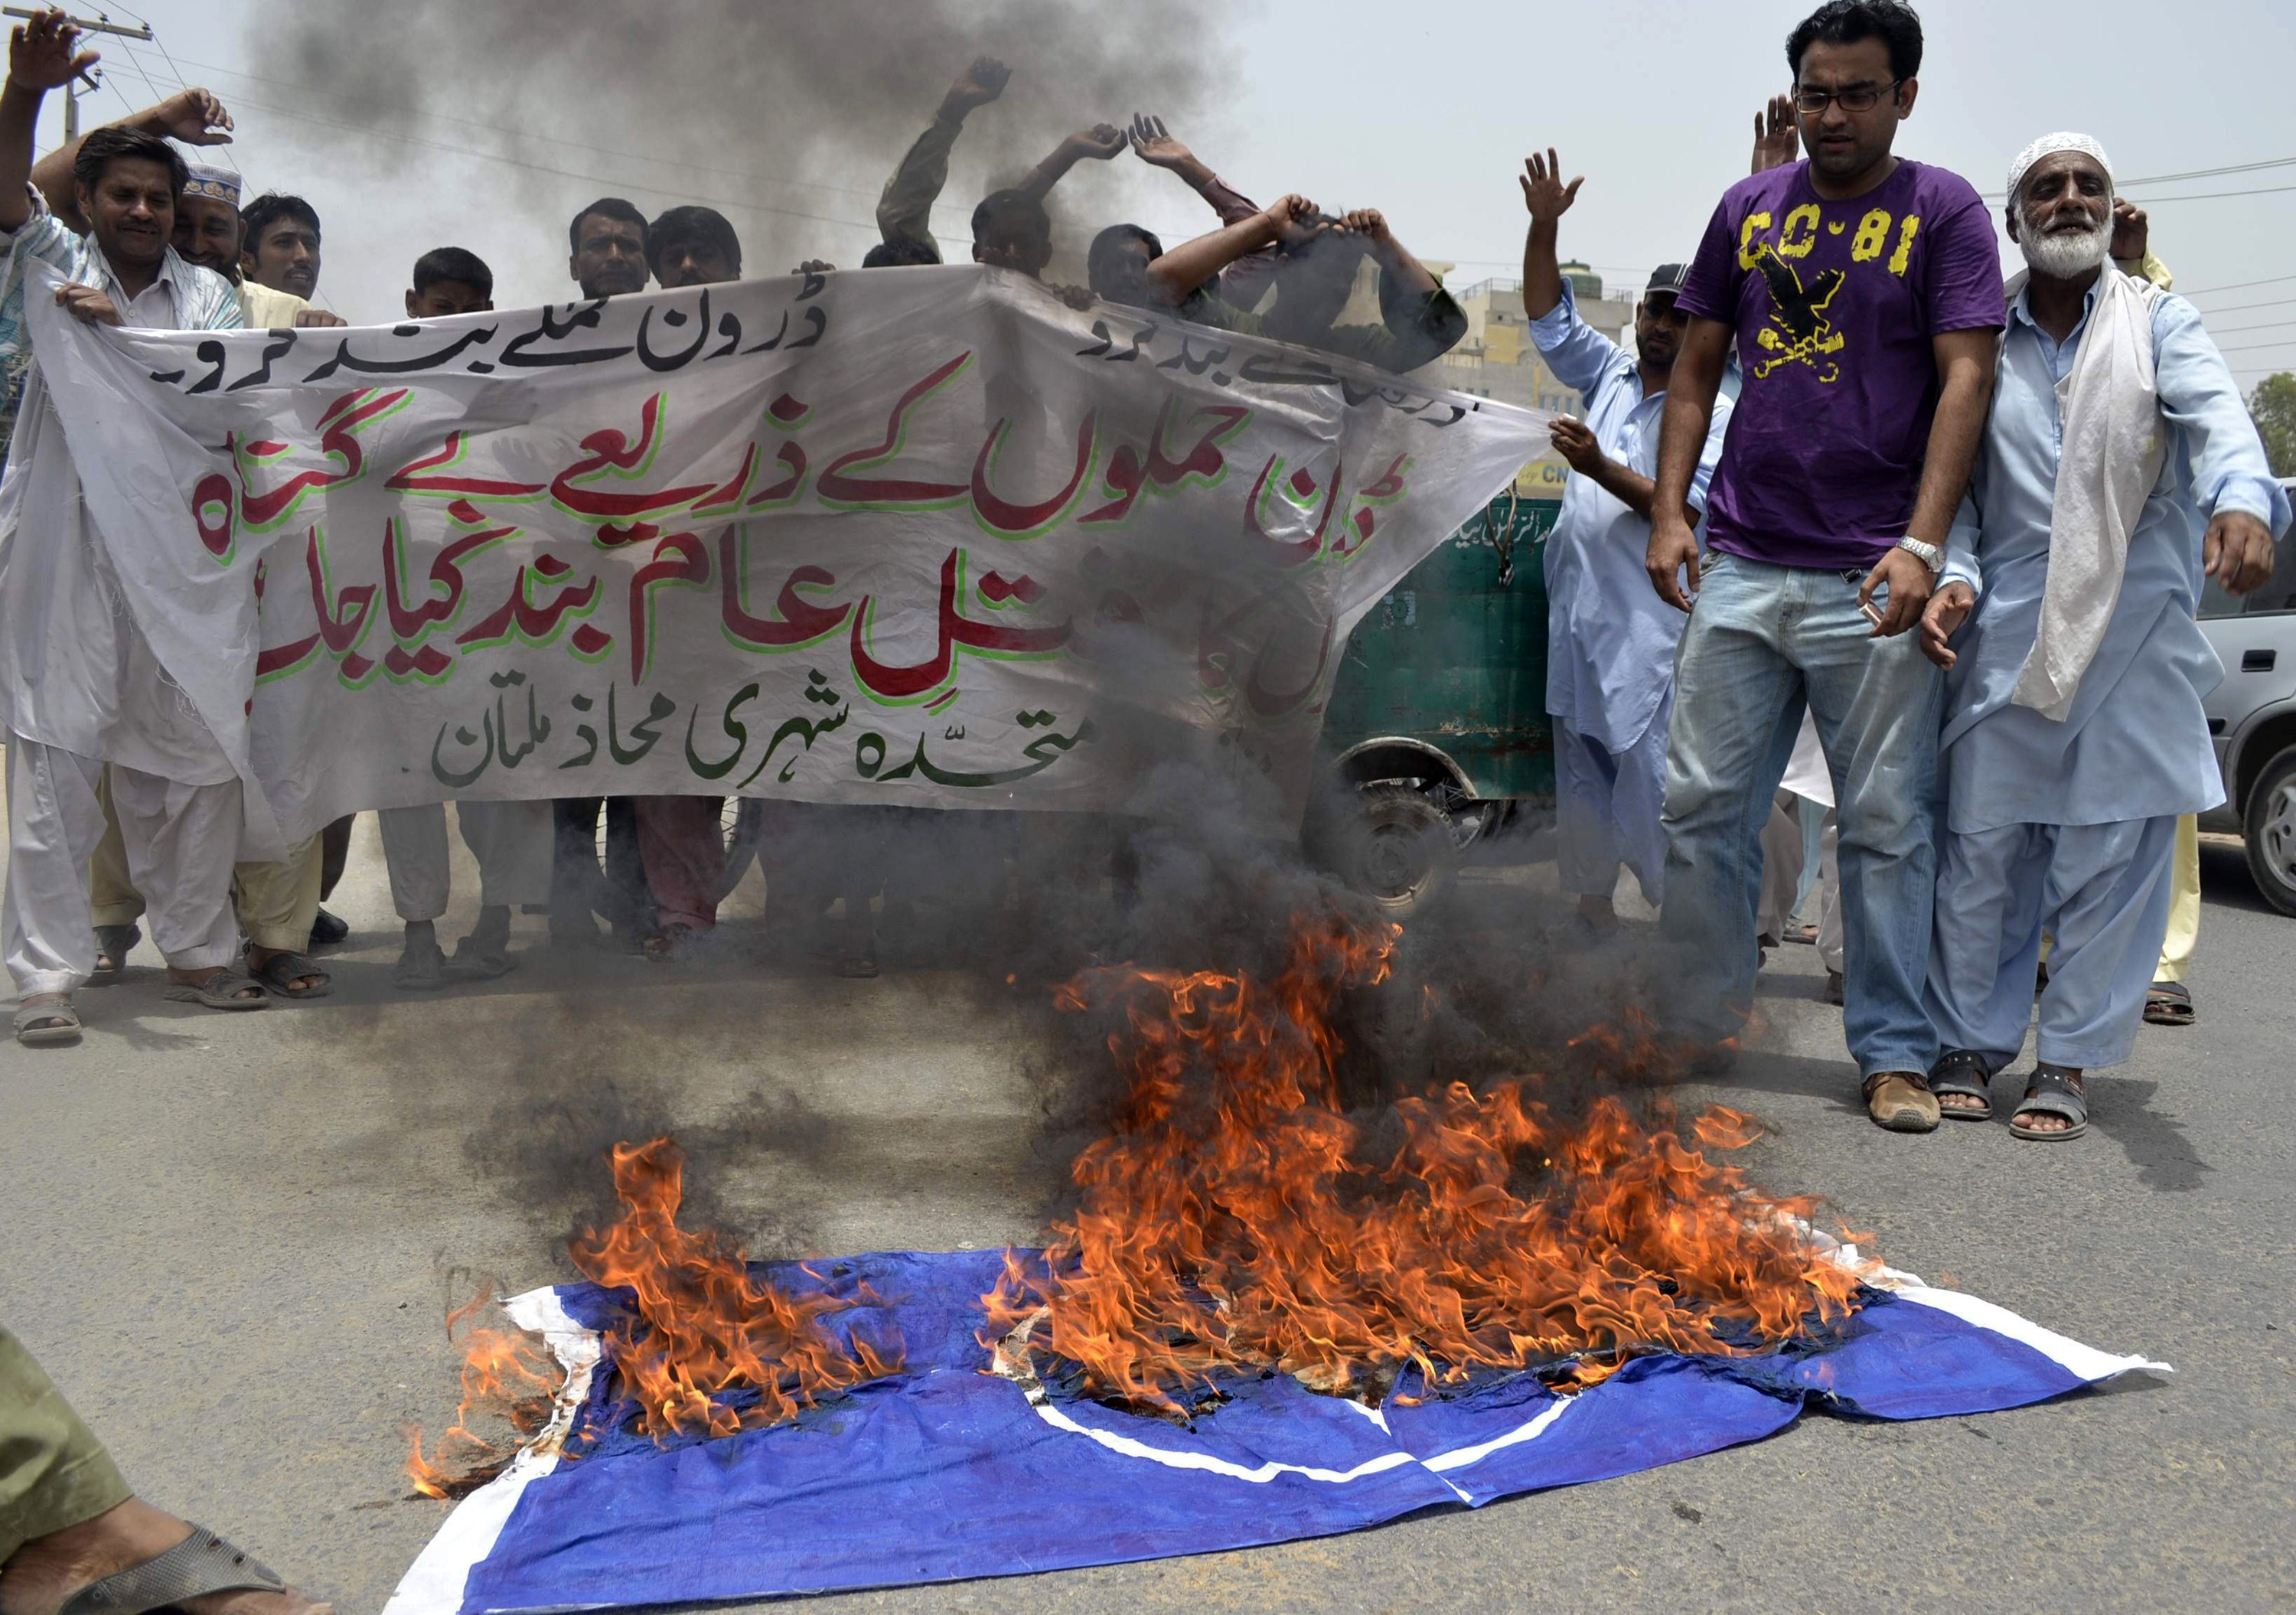 Pakistani protesters shout slogans beside a burning NATO flag during a demonstration against drone attacks in Multan on June 27, 2012.